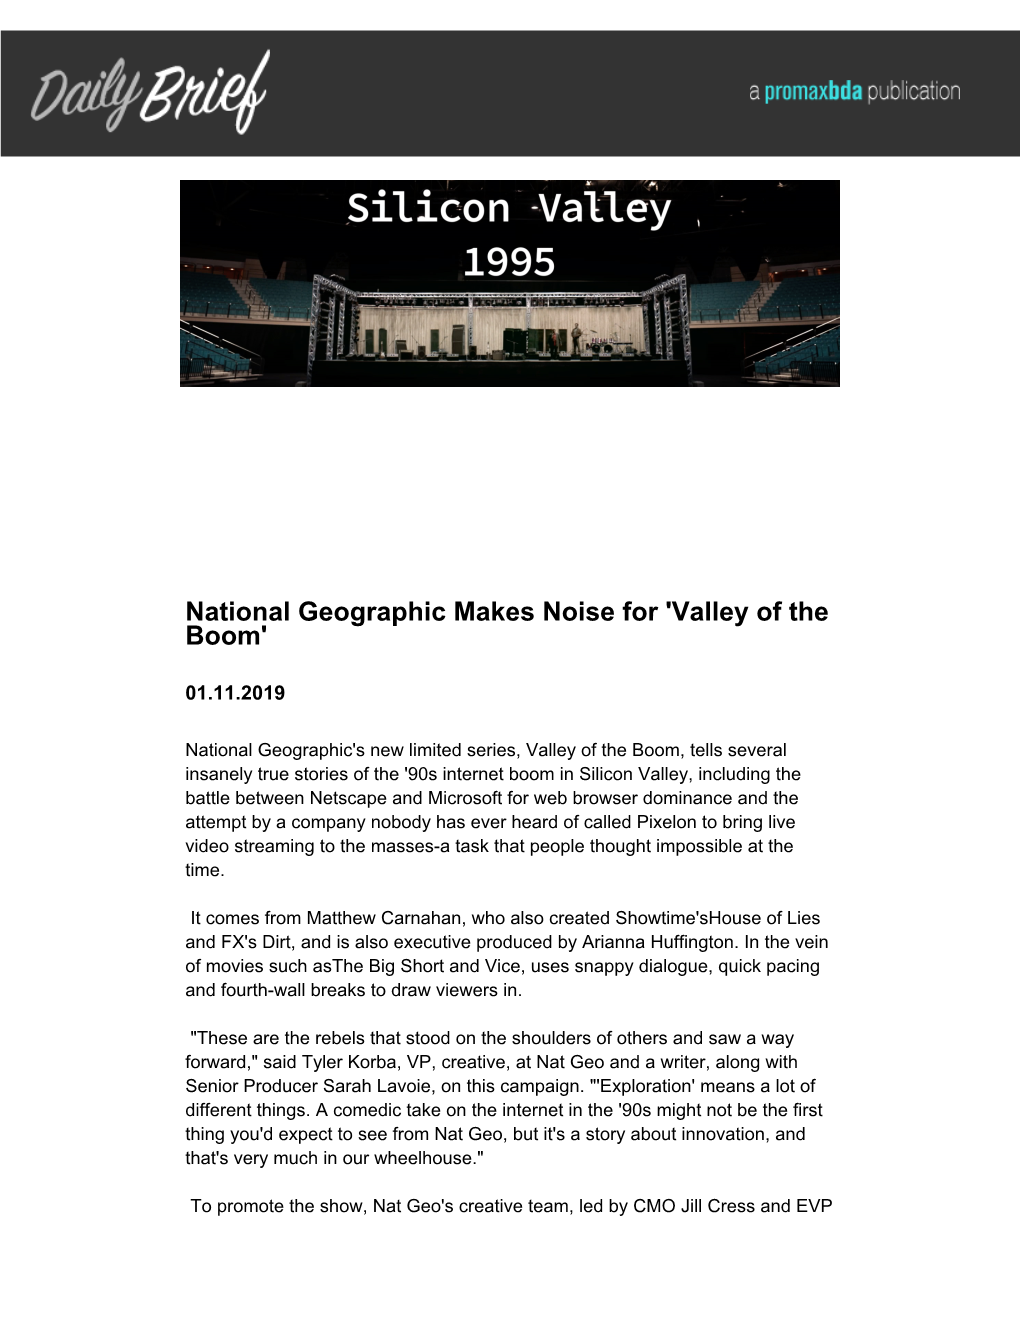 National Geographic Makes Noise for 'Valley of the Boom'